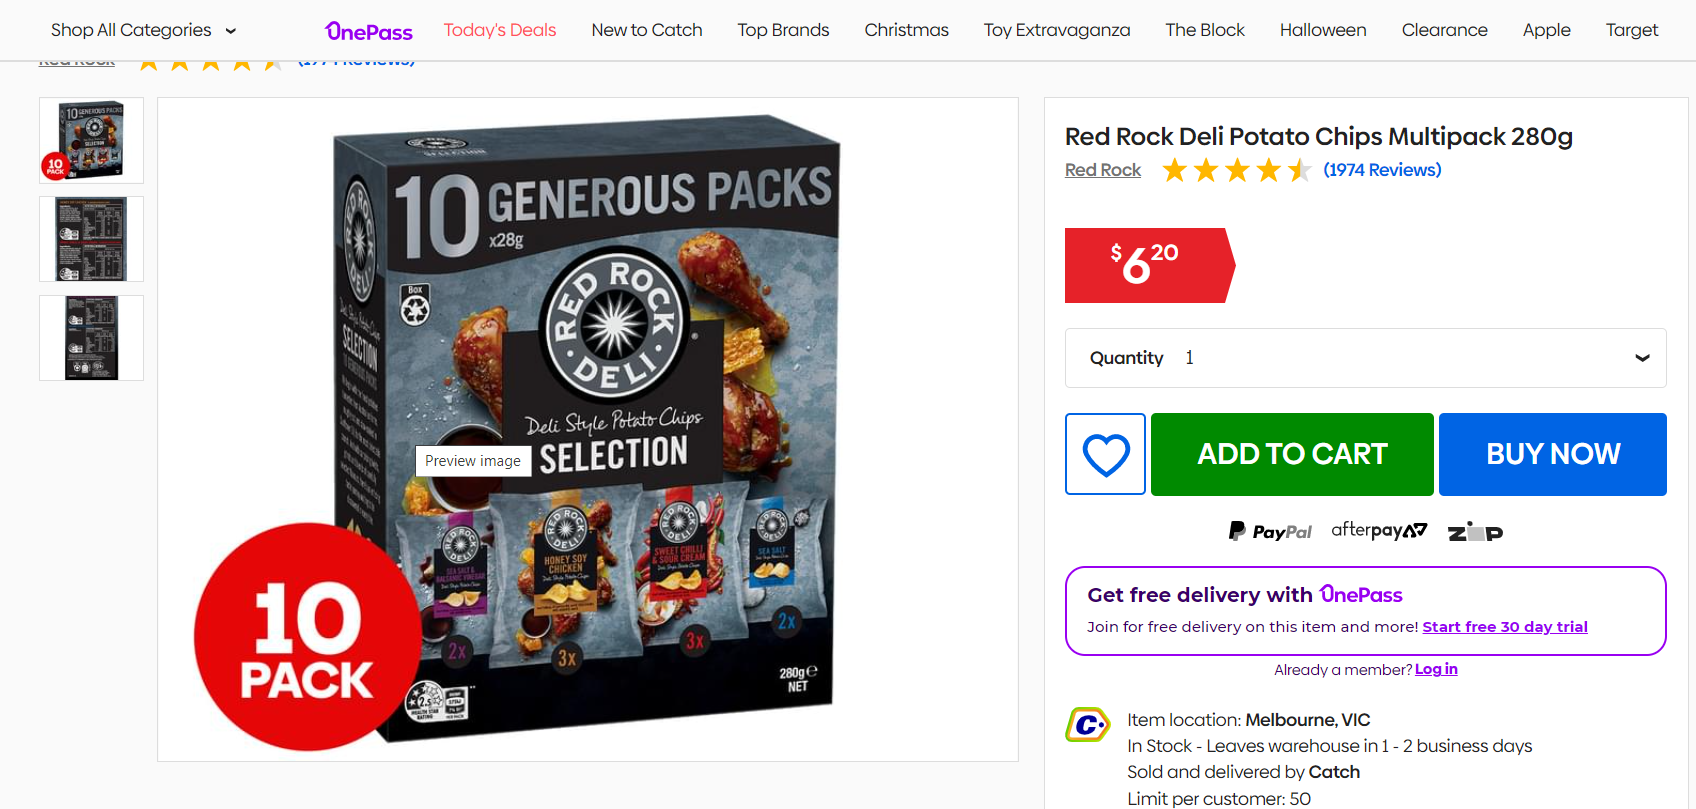 Red Rock Deli Potato Chips Multipack 280g now $6.20 delivered at Catch